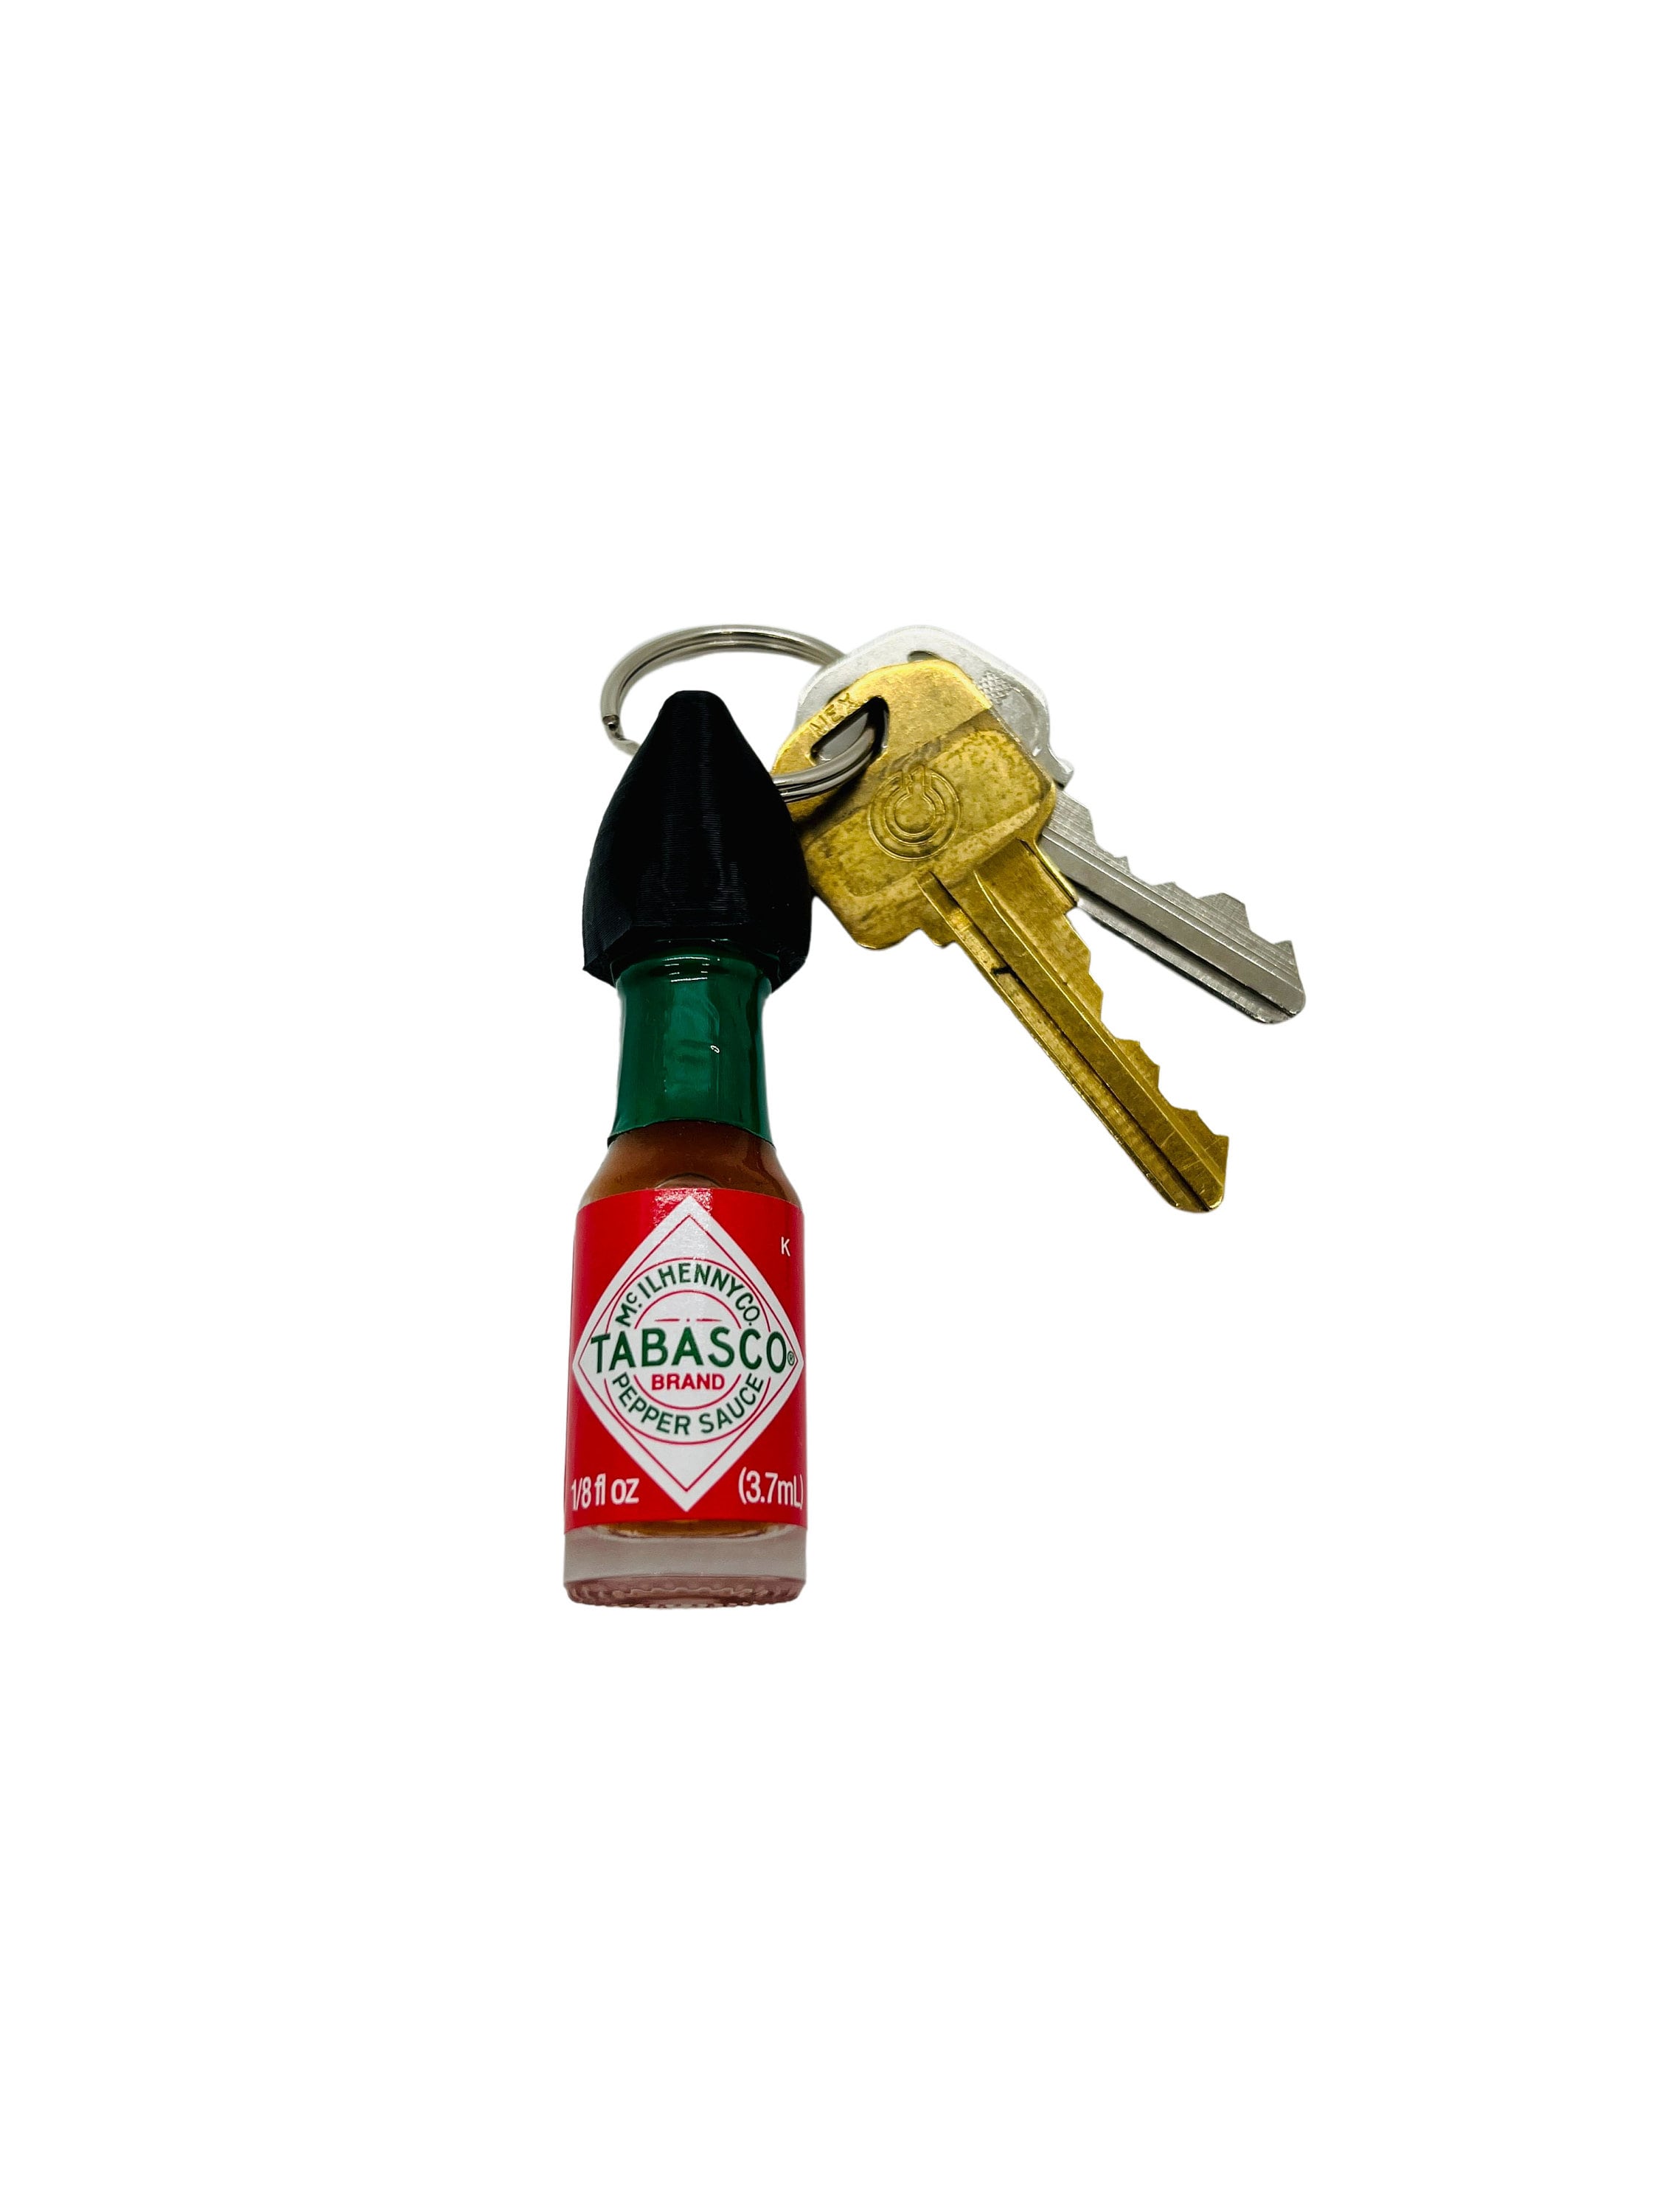 Hot Sauce Keychain With Real Mini Tabasco Sauce Bottle 